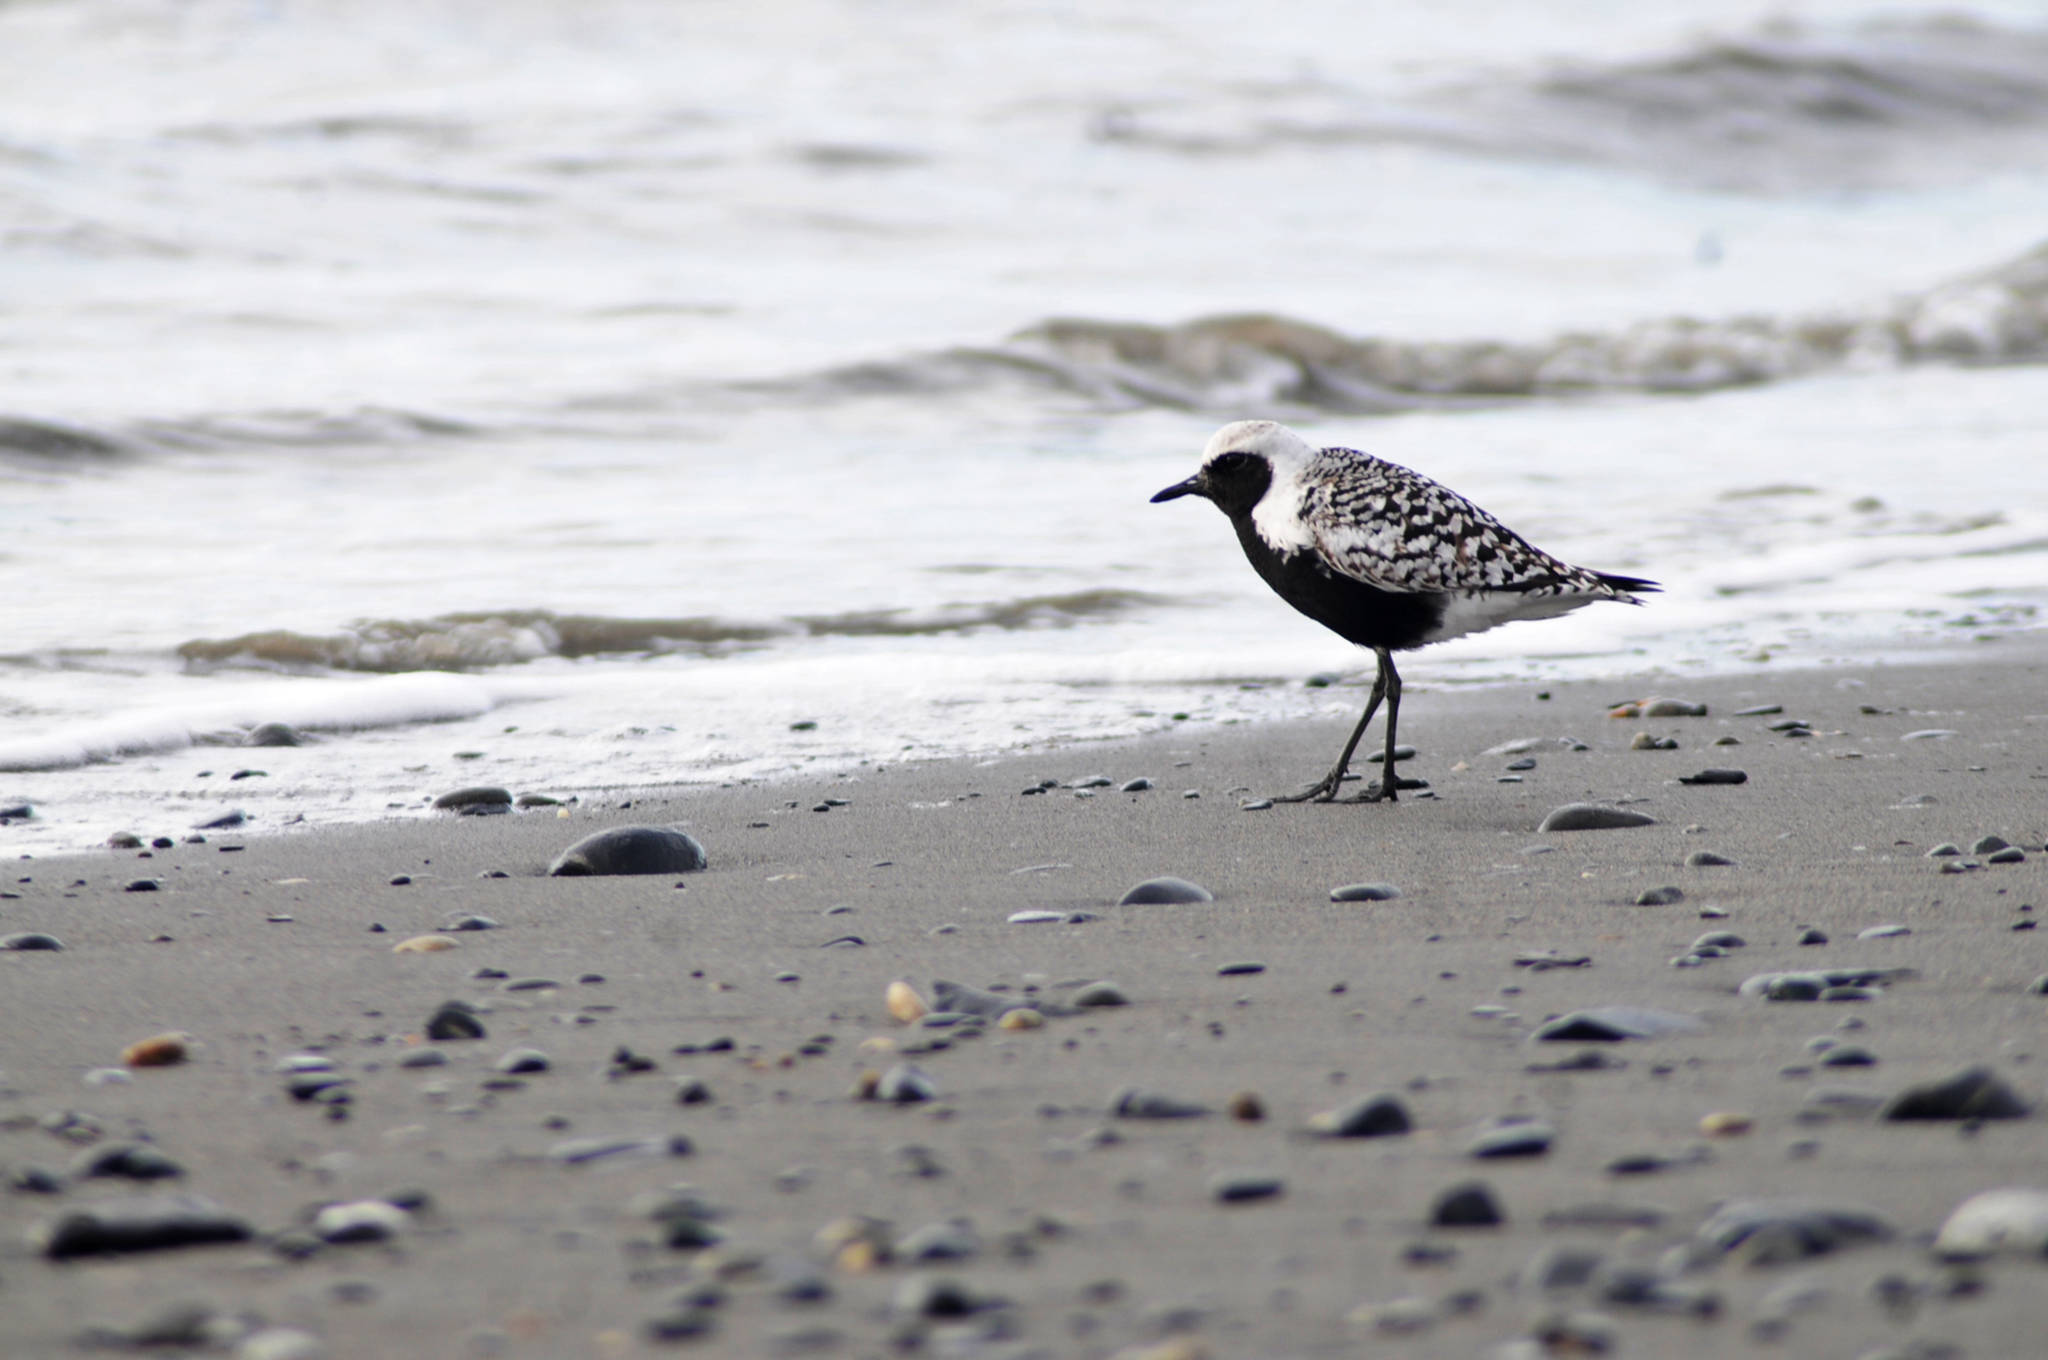 In this June 2016 photo, a shorebird looks out to sea from the north Kasilof River beach near Kasilof, Alaska. (Photo by Elizabeth Earl/Peninsula Clarion, file)